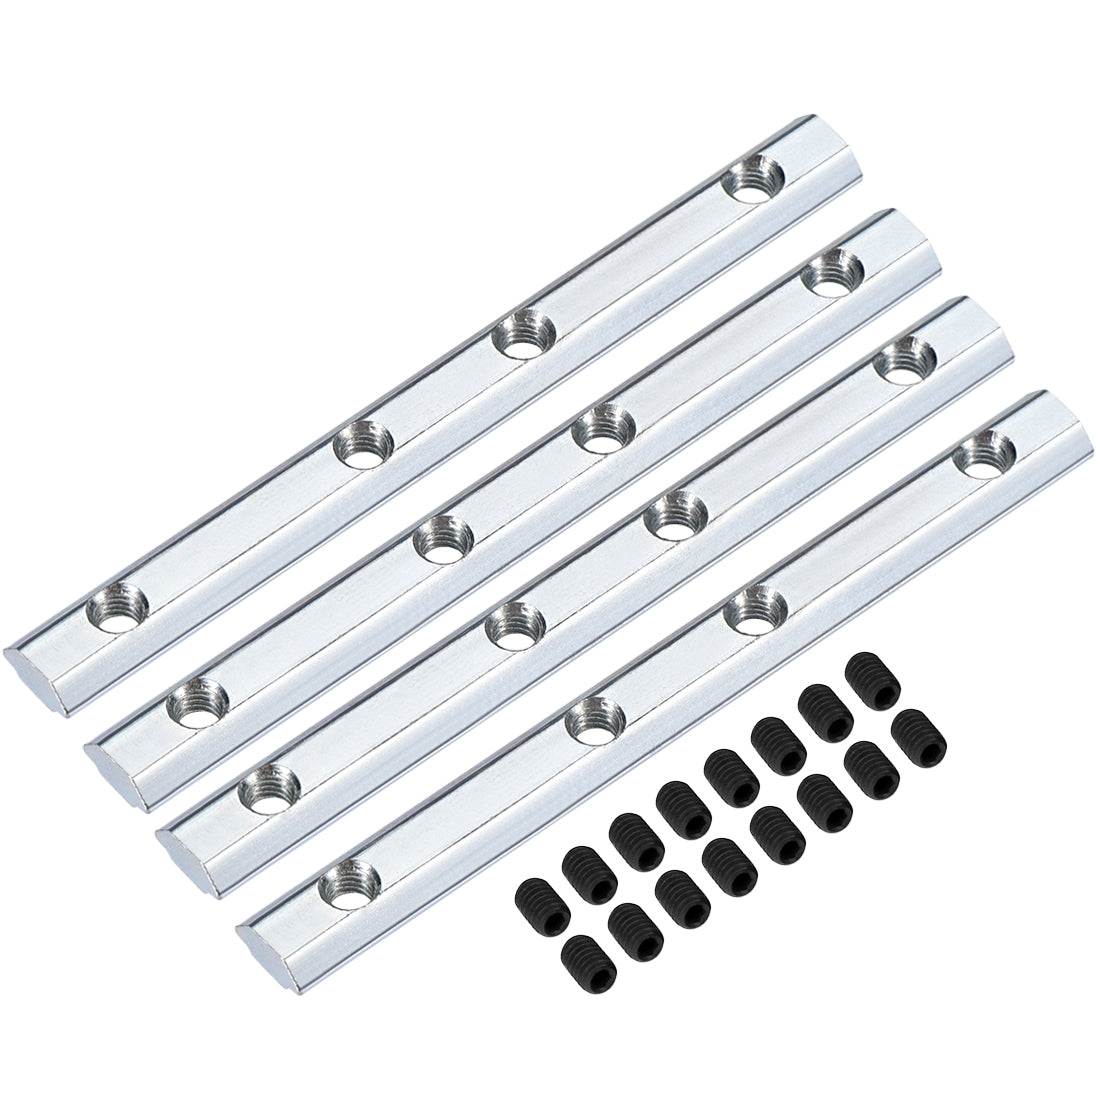 uxcell Uxcell Straight Line Connector, 3.9 Inch Joint Bracket with Screws for 2020 Series T Slot 6mm Aluminum Extrusion Profile, 4 Pcs